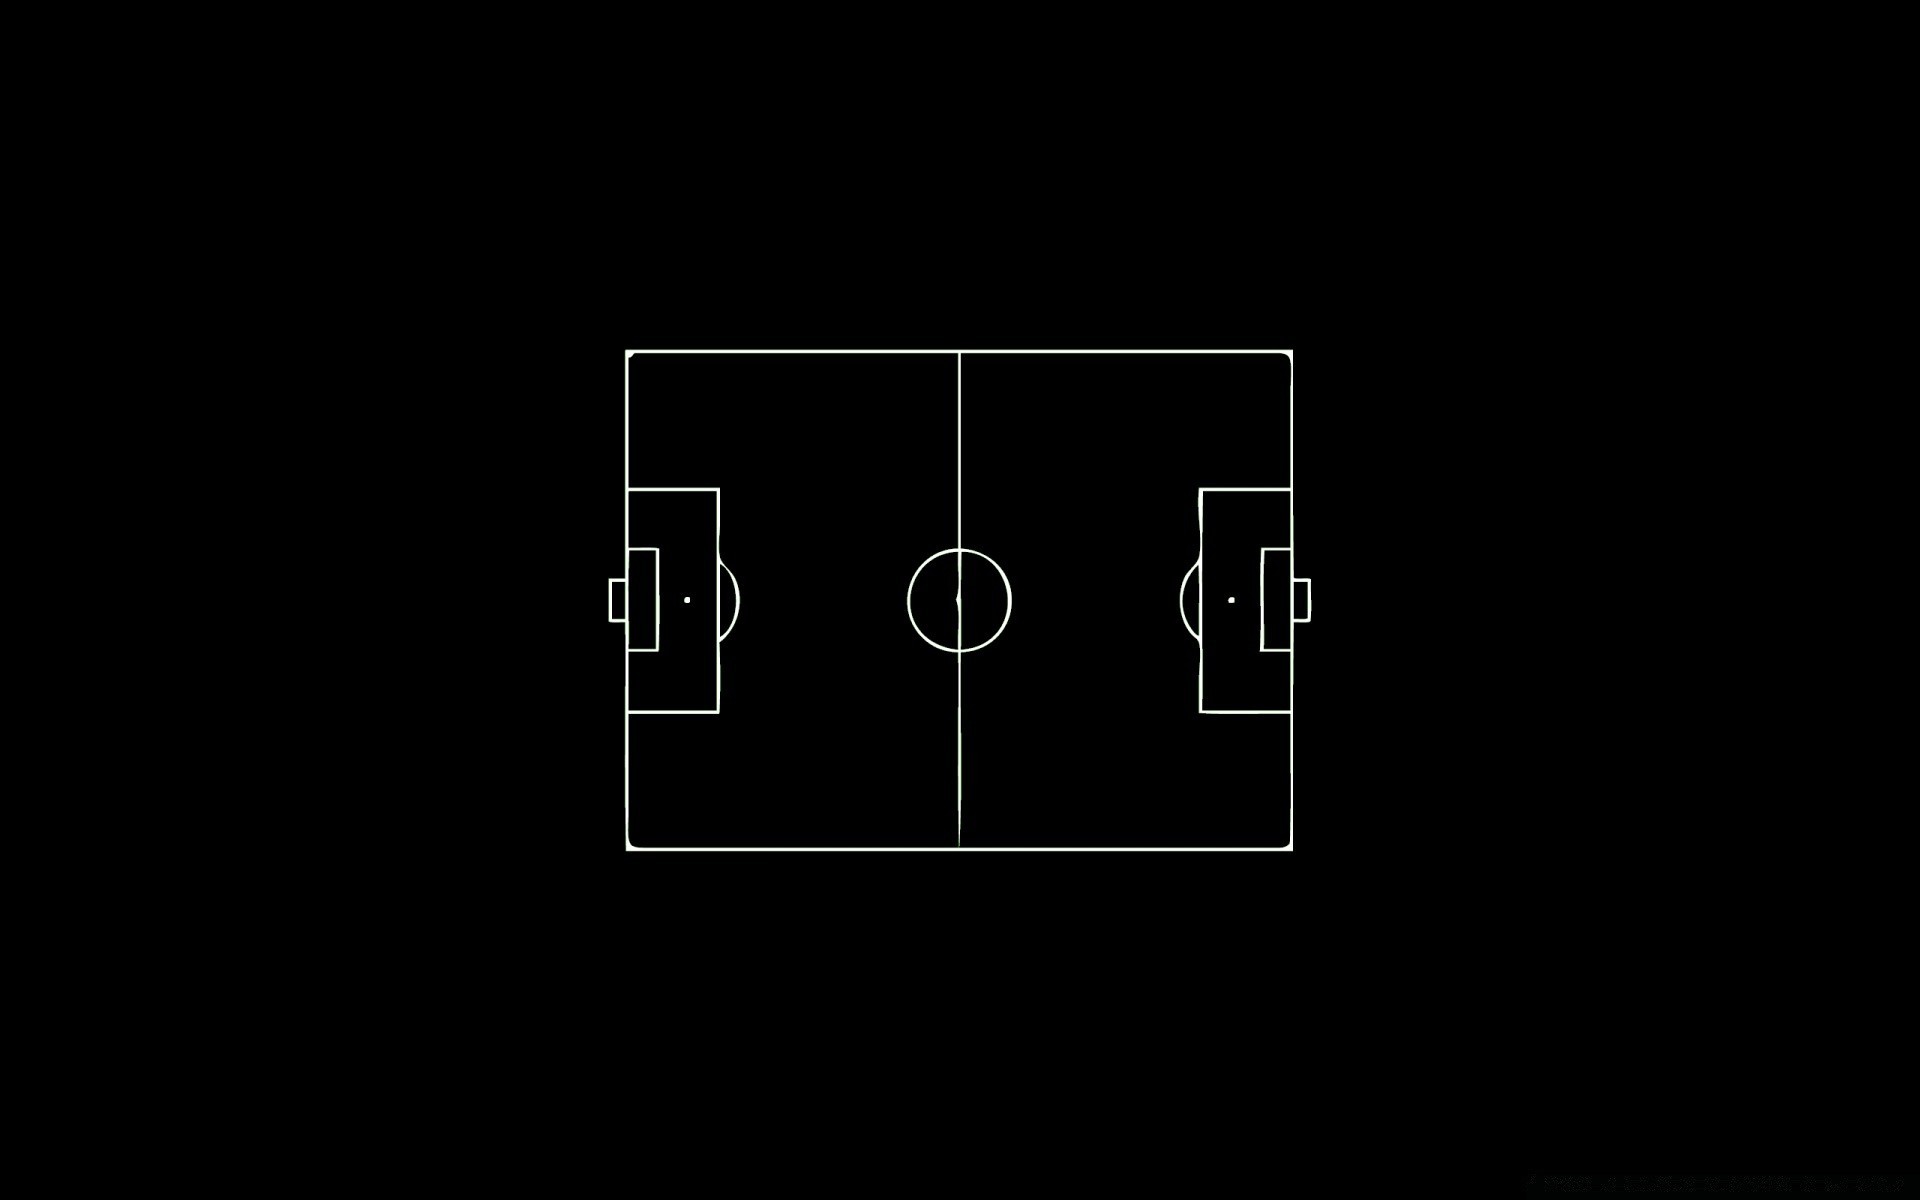 Diagram of a football field on a black background phone background image